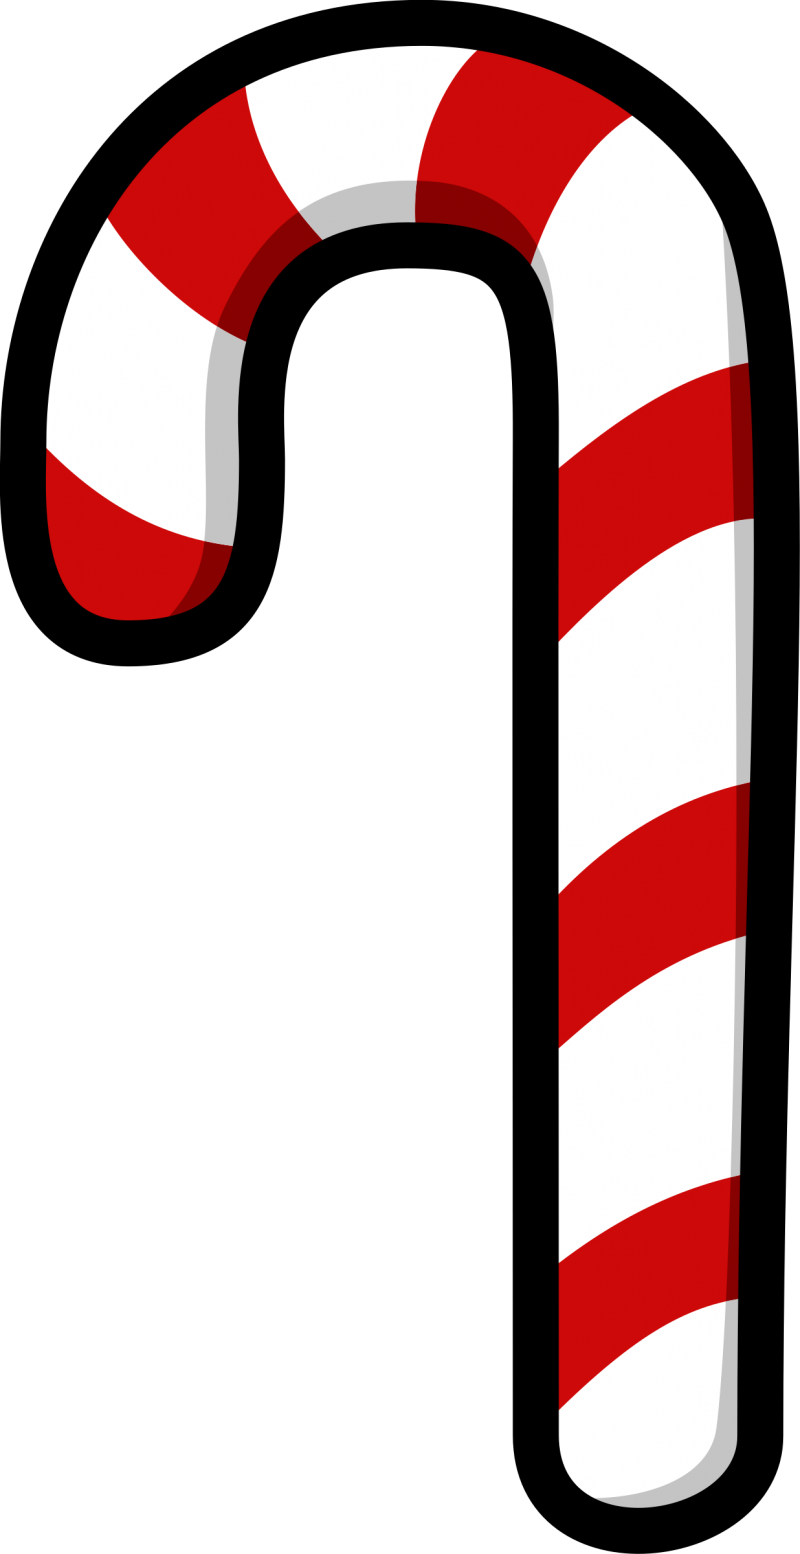 Download PNG image - Christmas Candy Cane Download PNG Image 